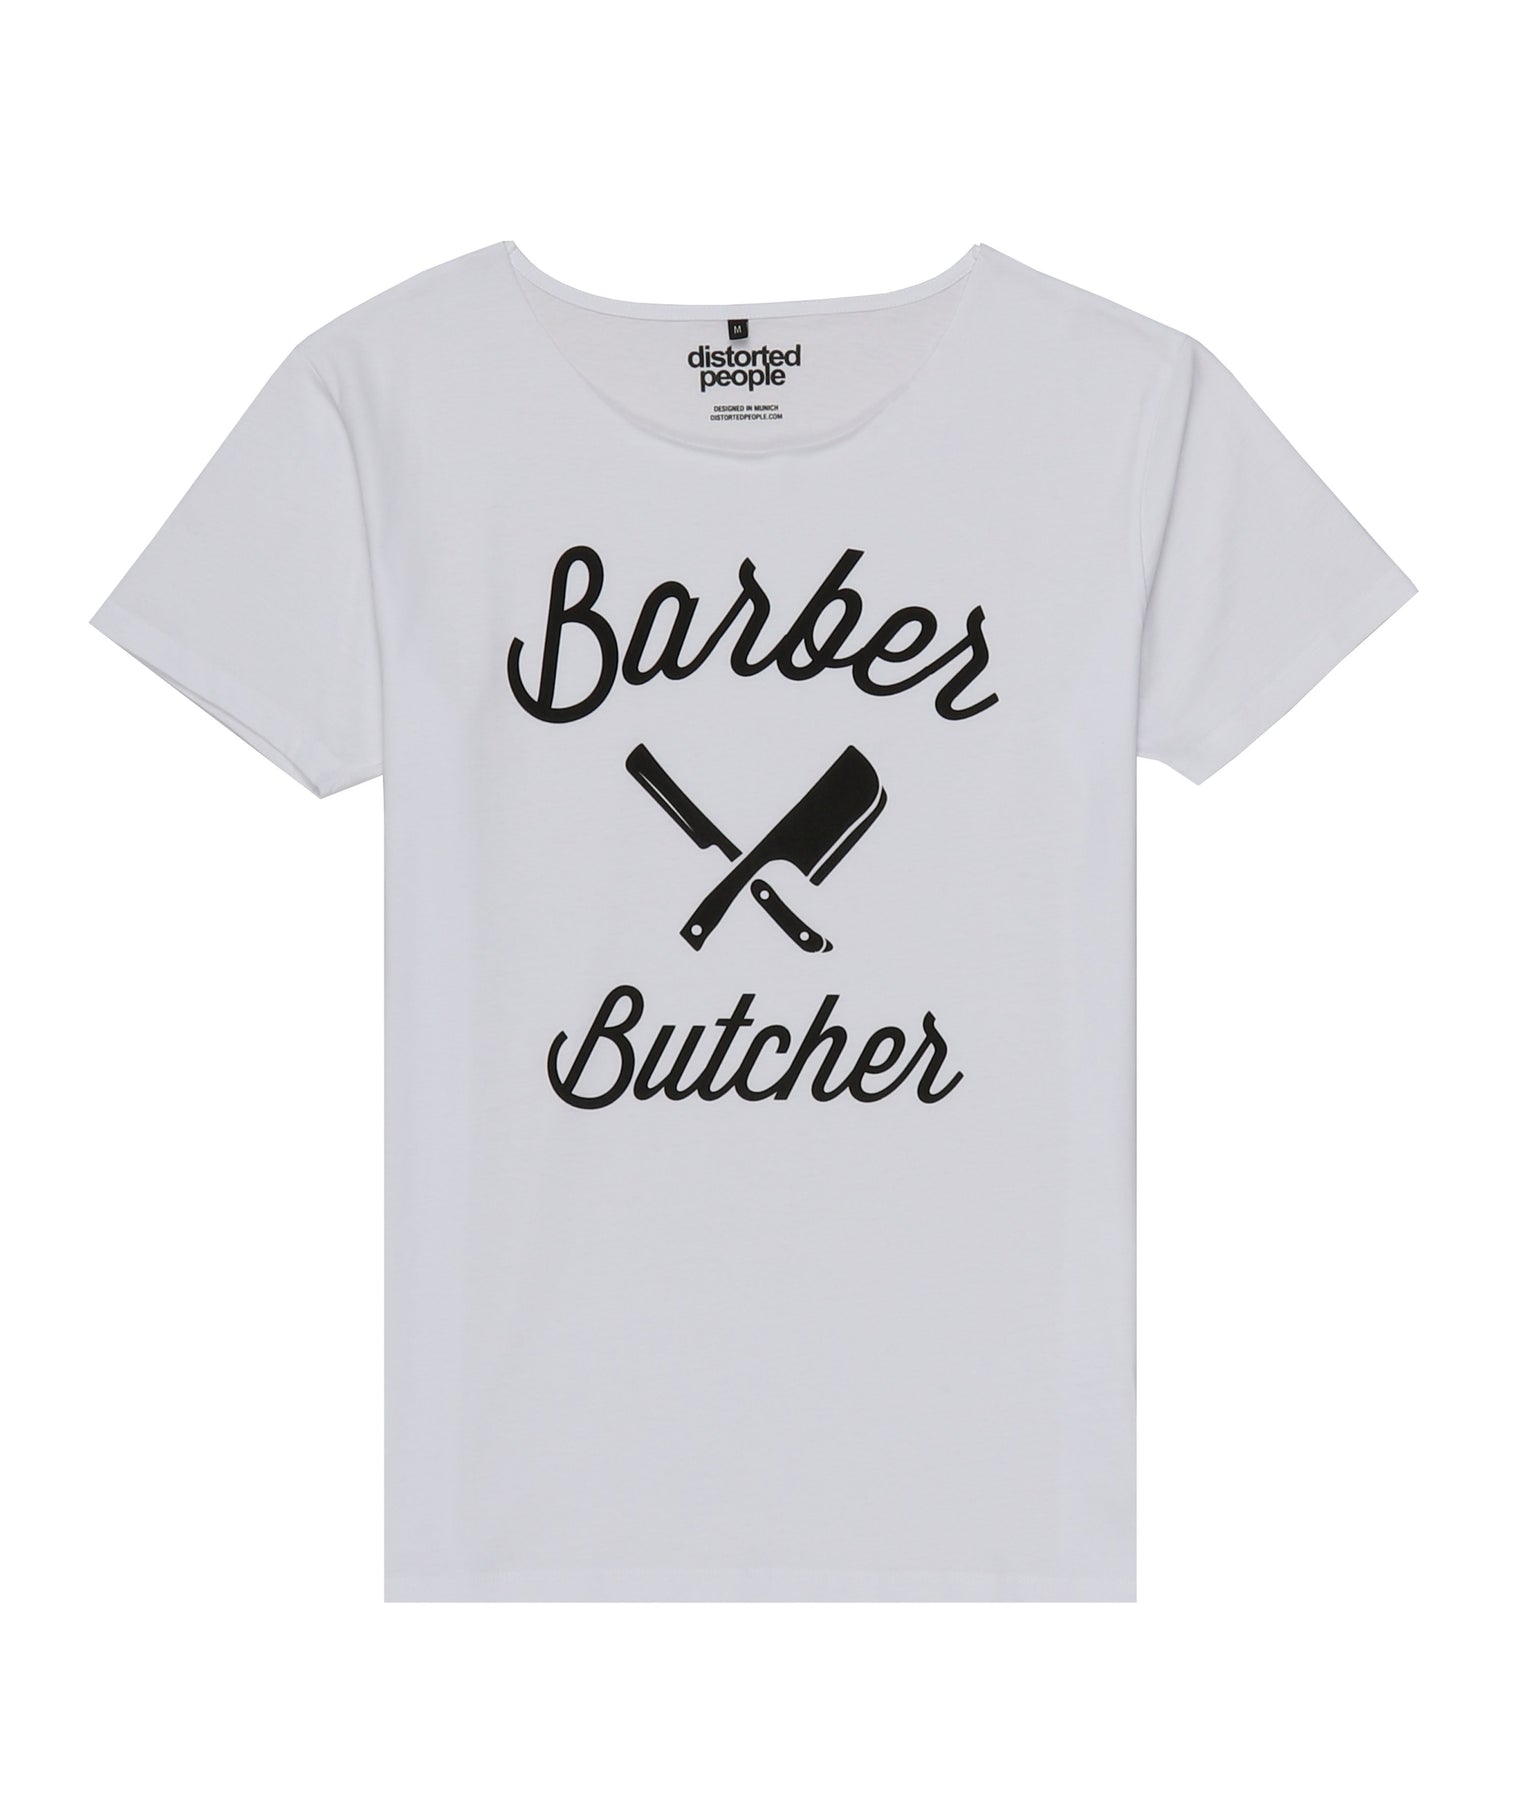 Black Barber & Butcher T-Shirt Neck People Cut – | People Distorted Distorted Blades USA